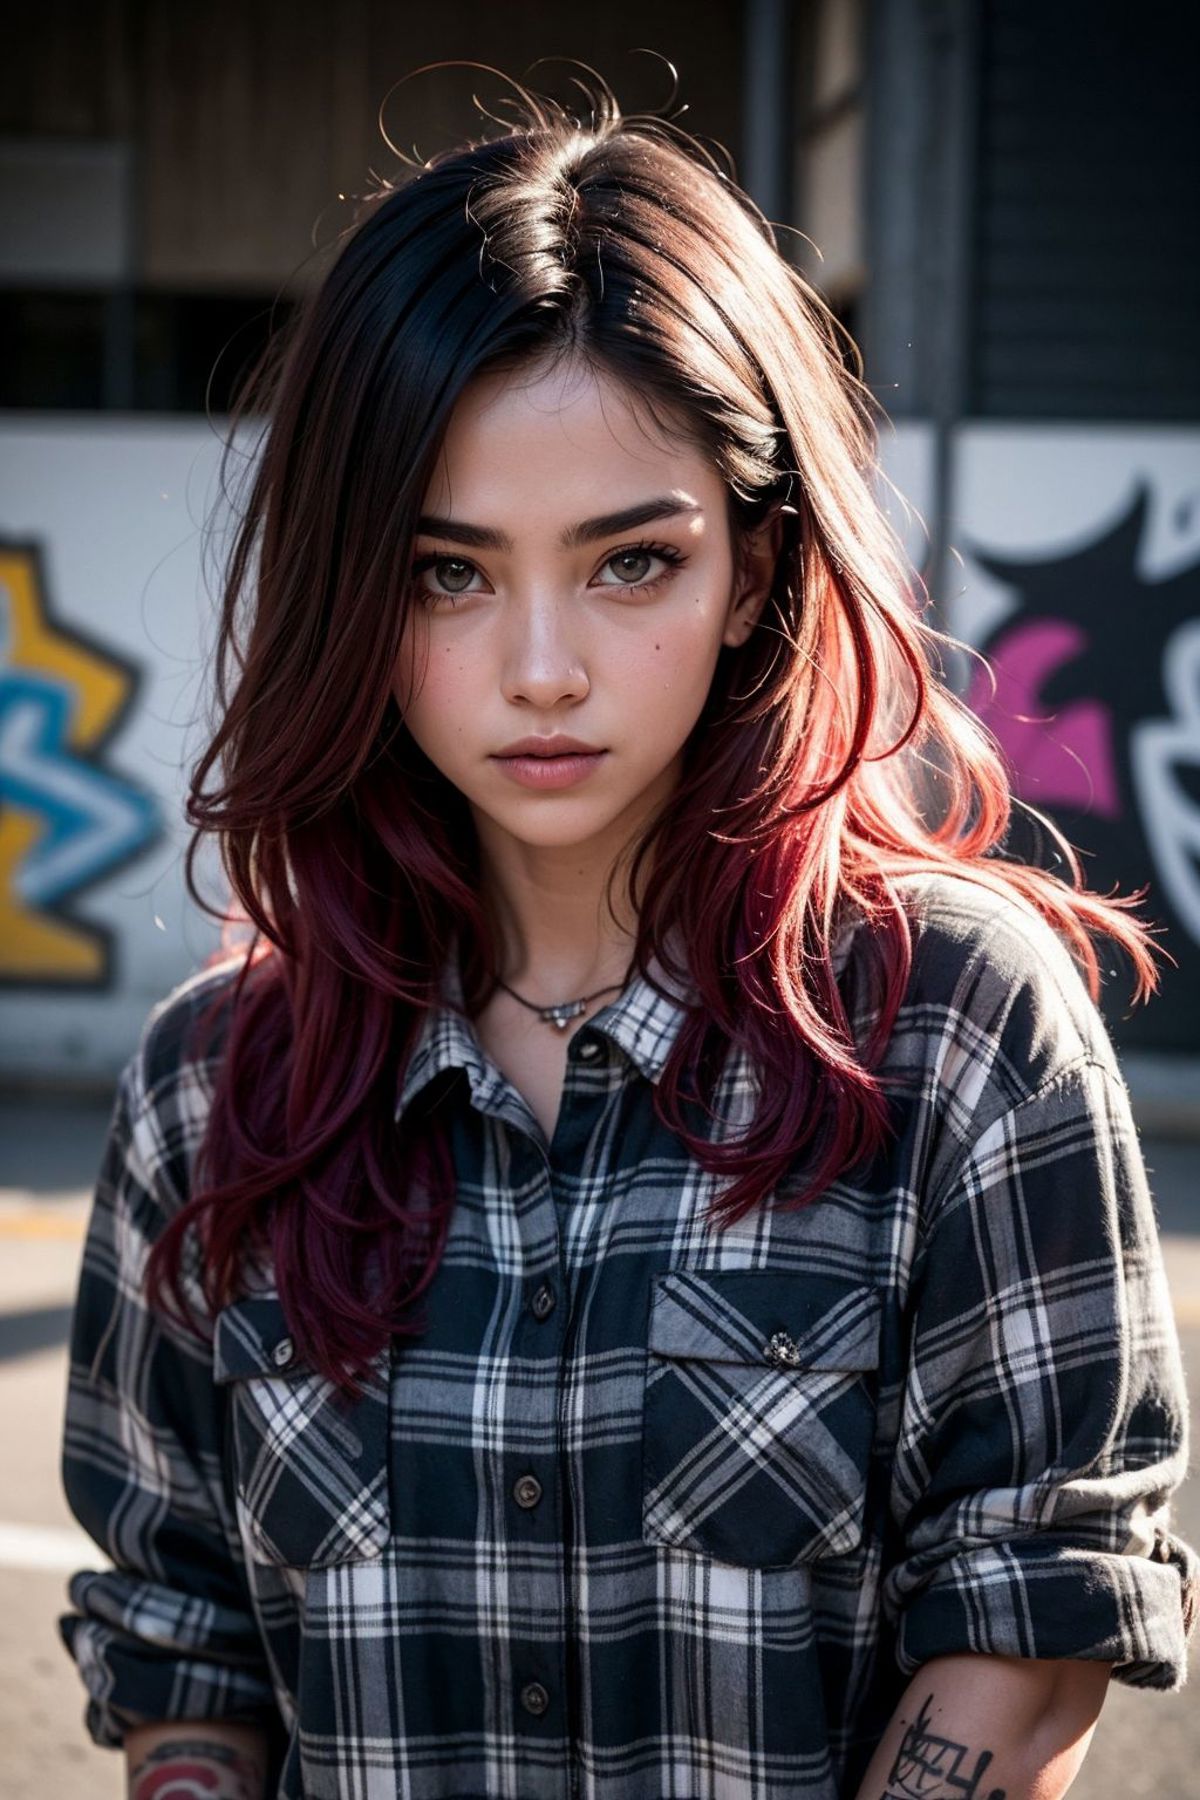 A young woman with red hair wearing a black and white plaid shirt.